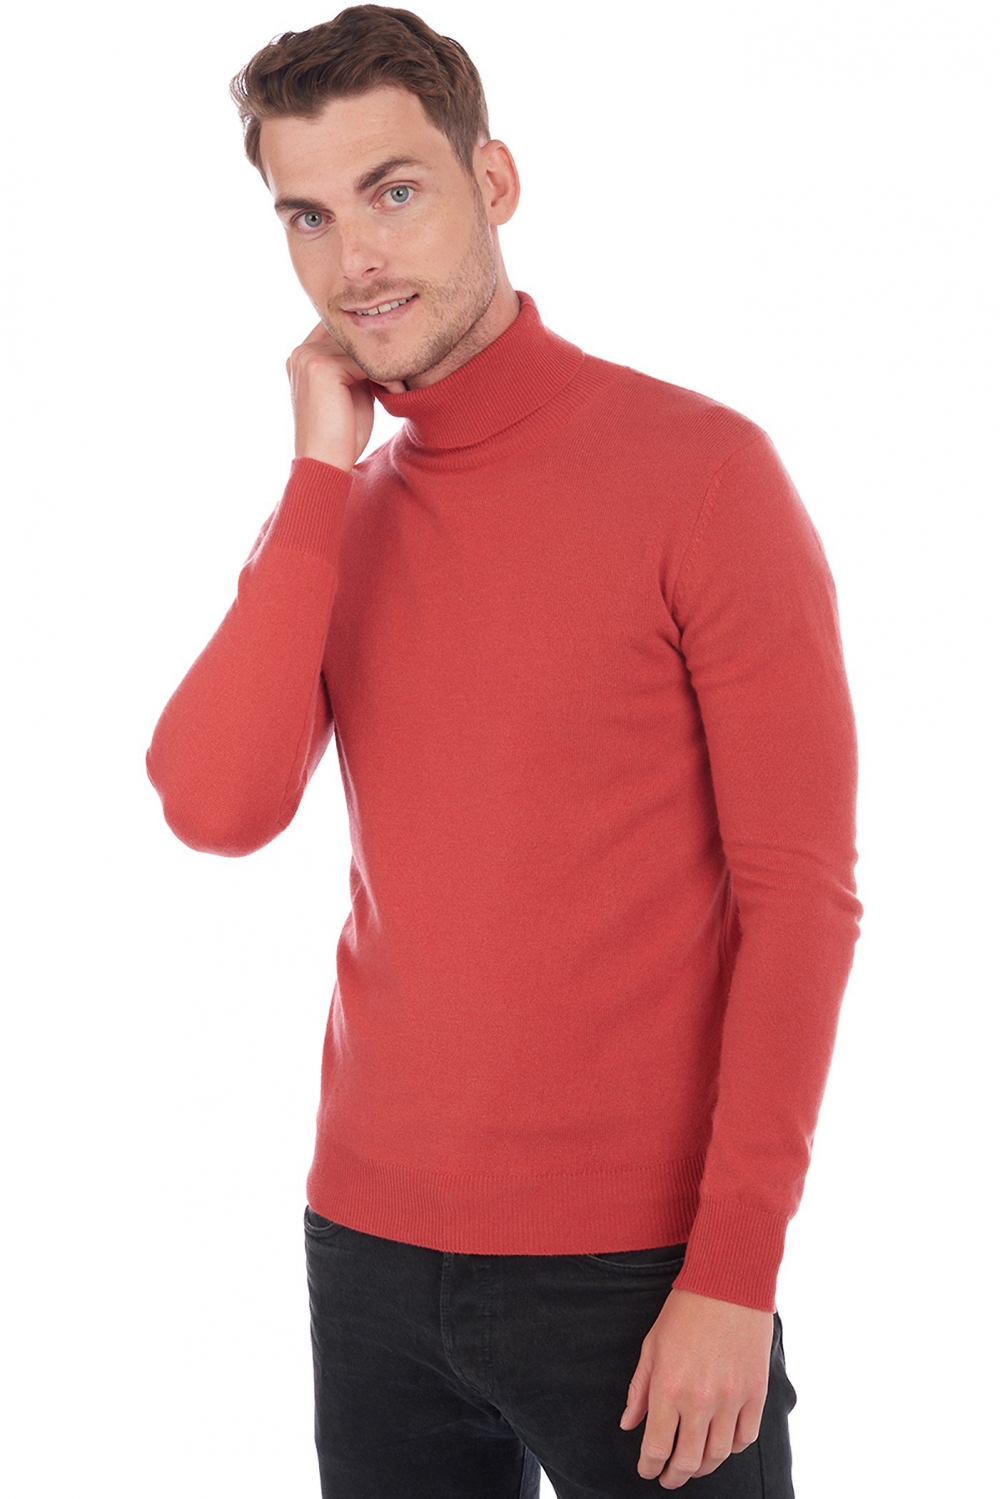 Cachemire petits prix homme tarry first quite coral m